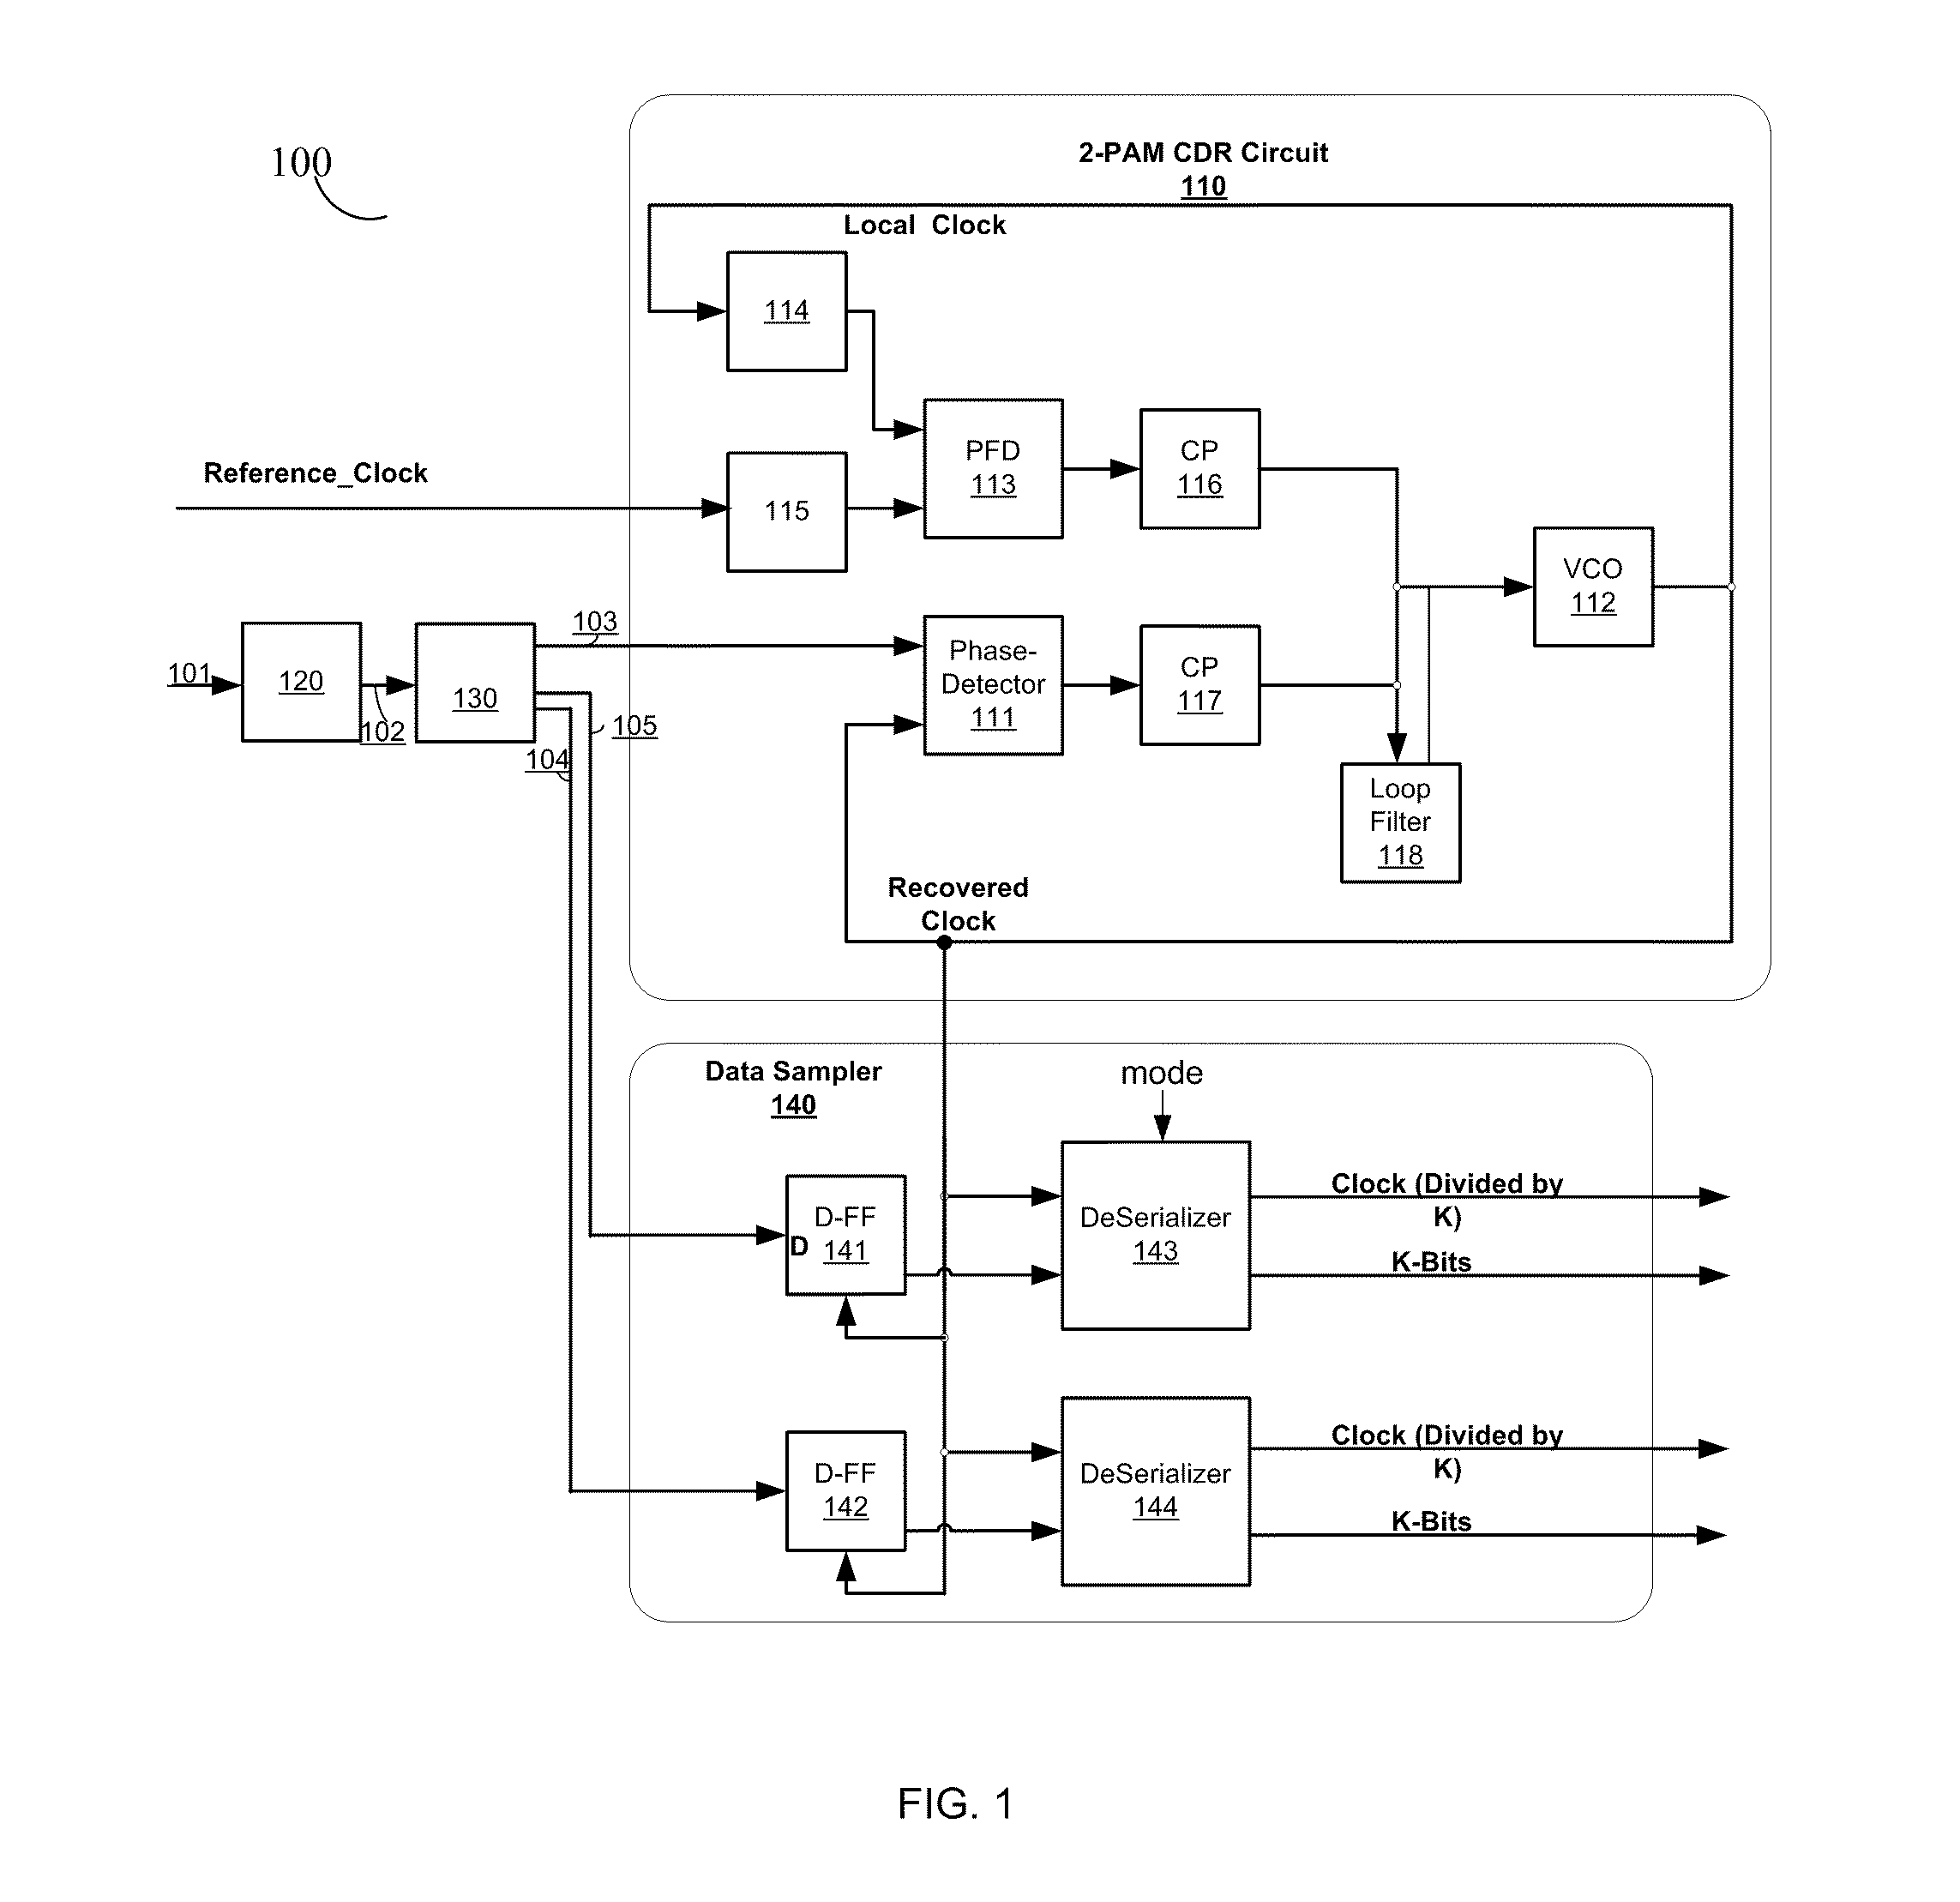 Apparatus and method thereof for clock and data recovery of n-PAM encoded signals using a conventional 2-PAM CDR circuit